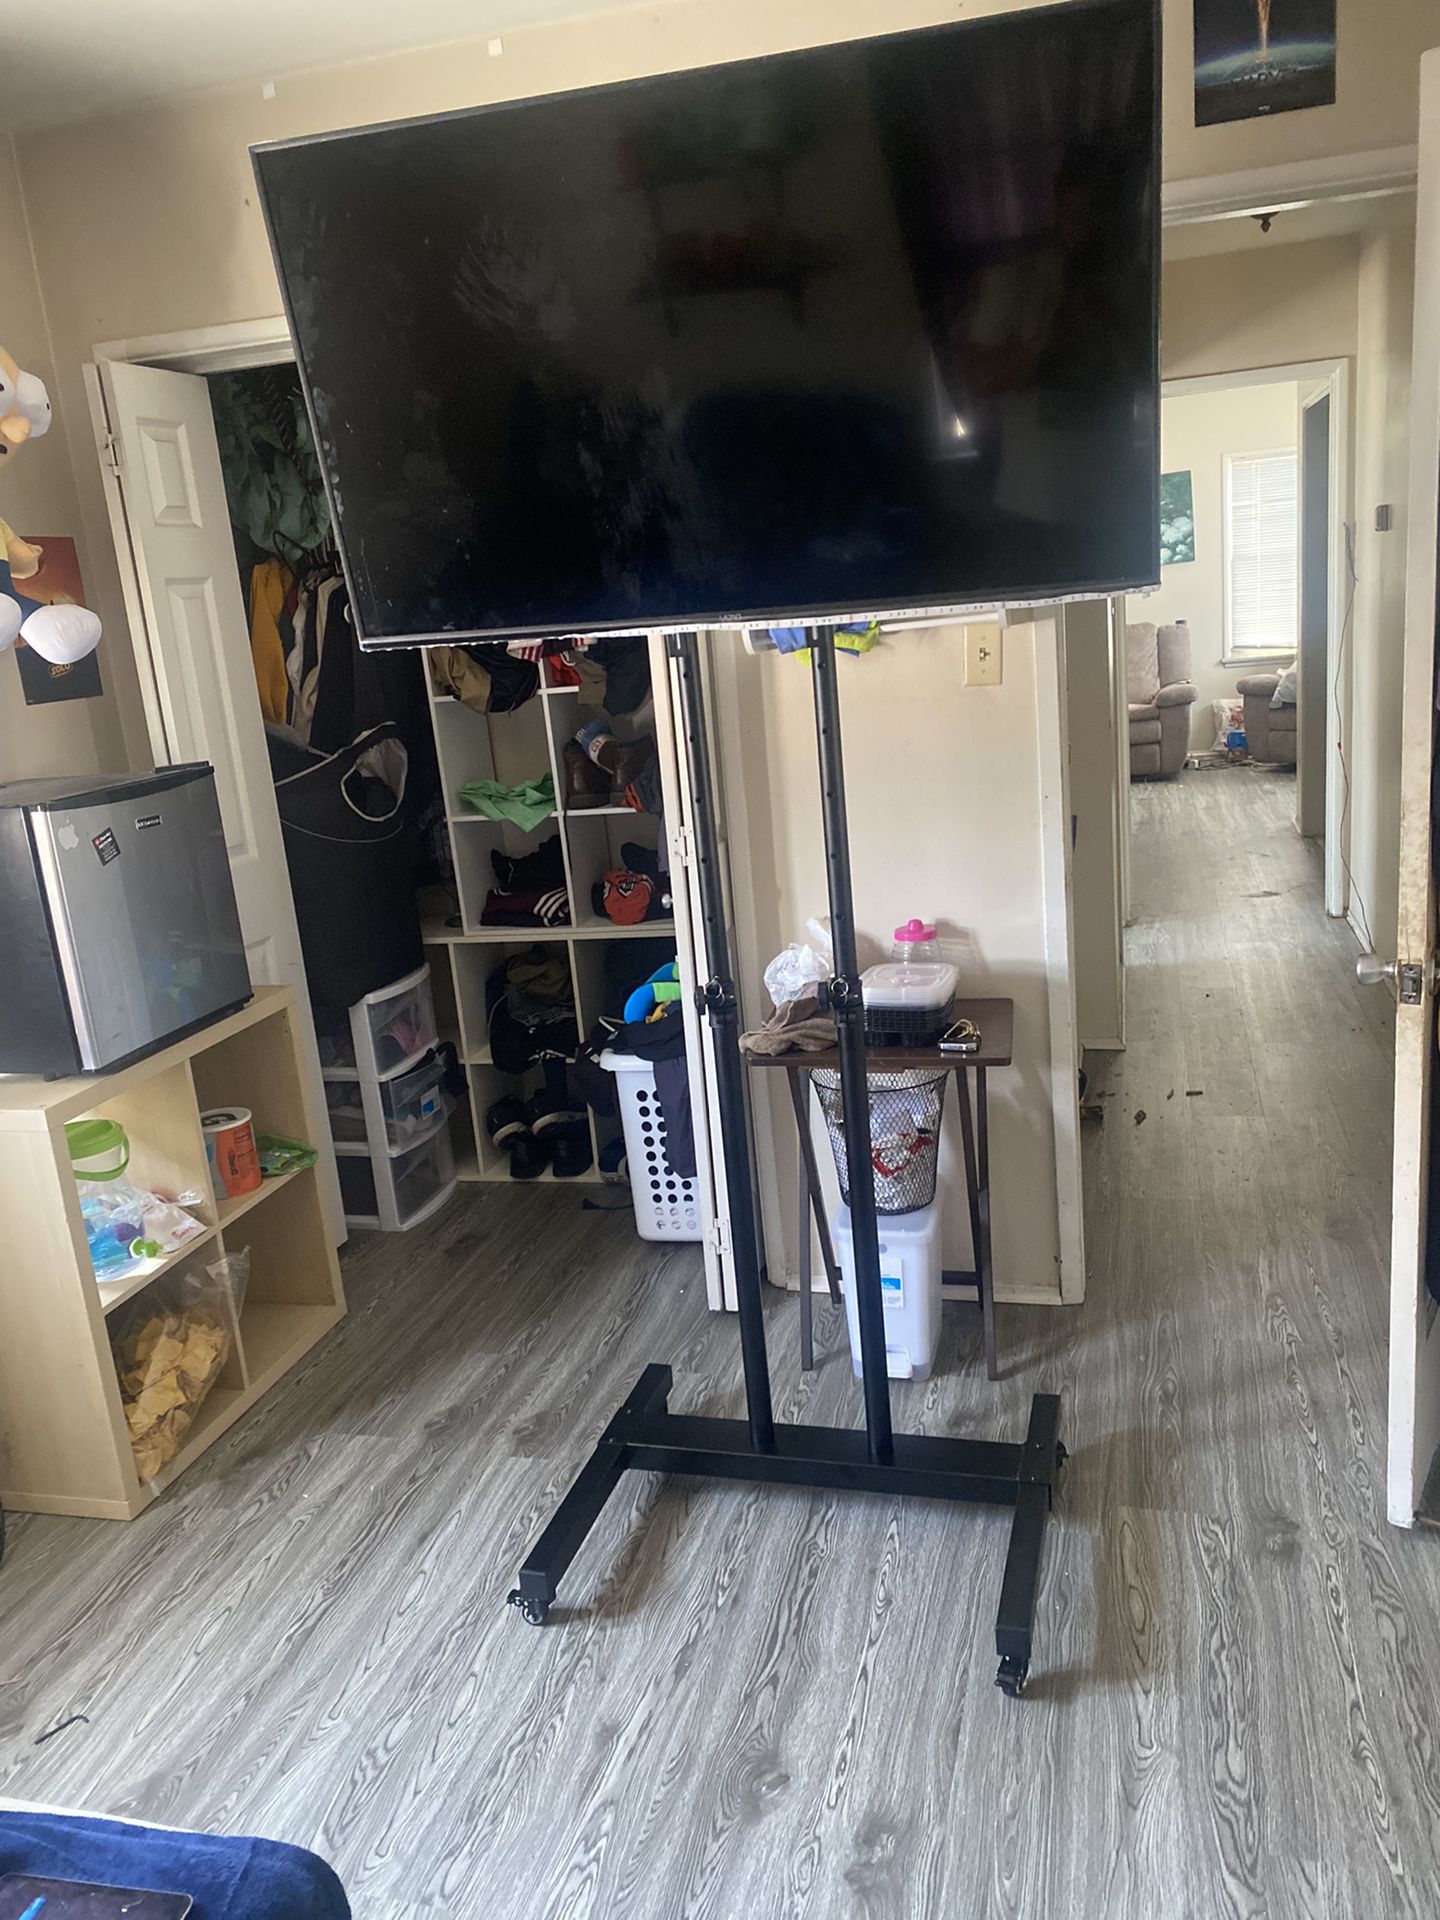 Mobile TV Stand 